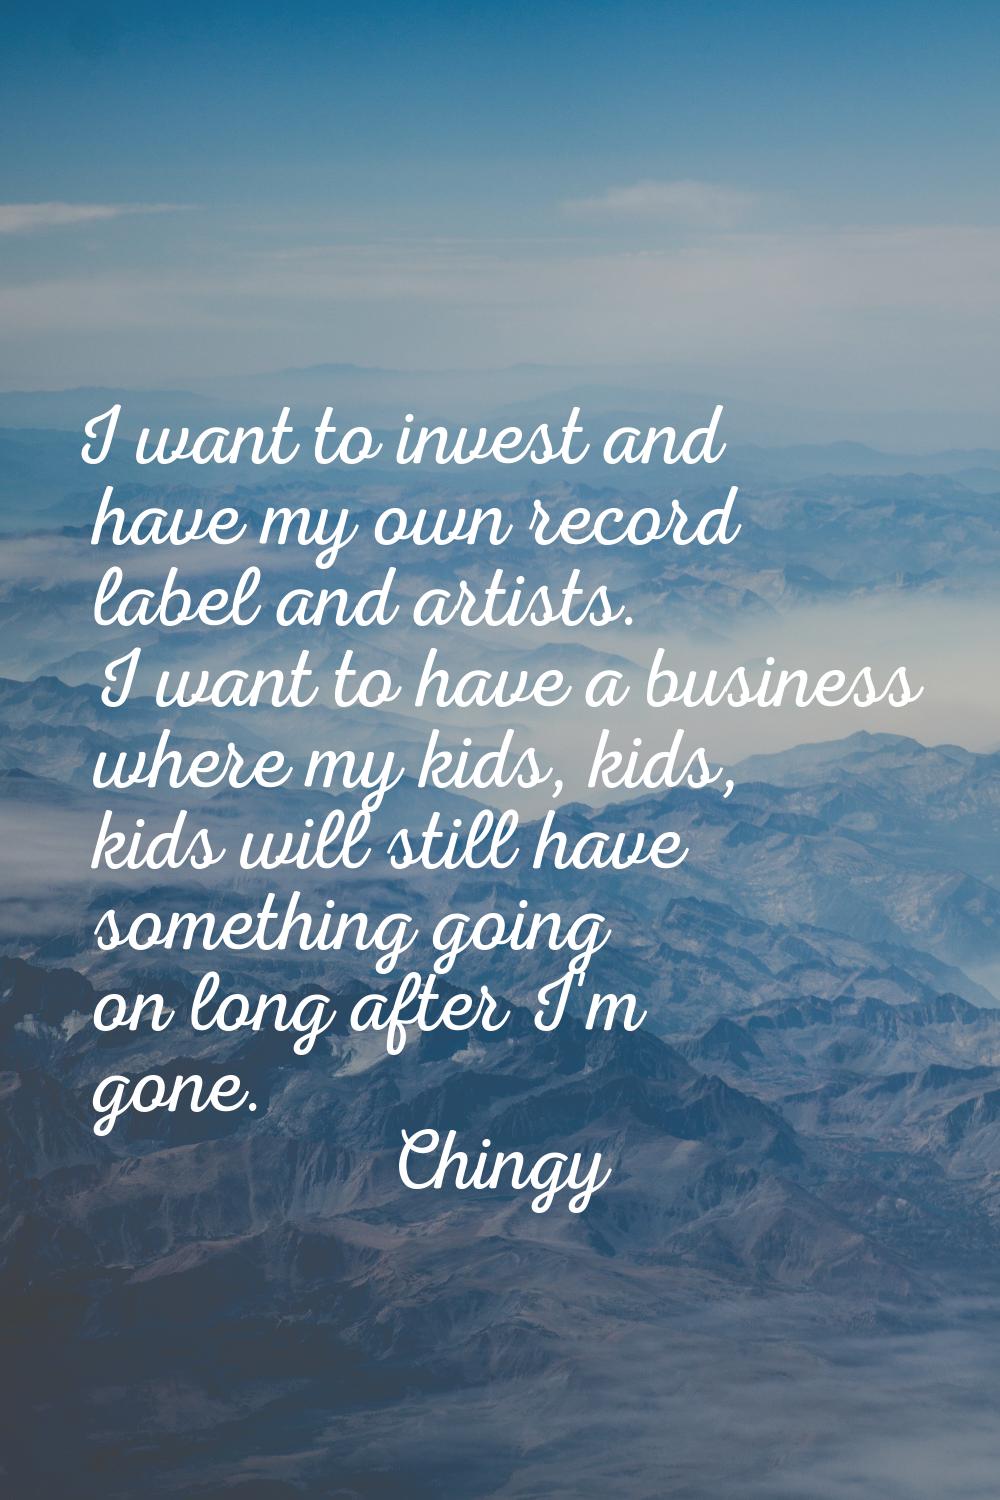 I want to invest and have my own record label and artists. I want to have a business where my kids,